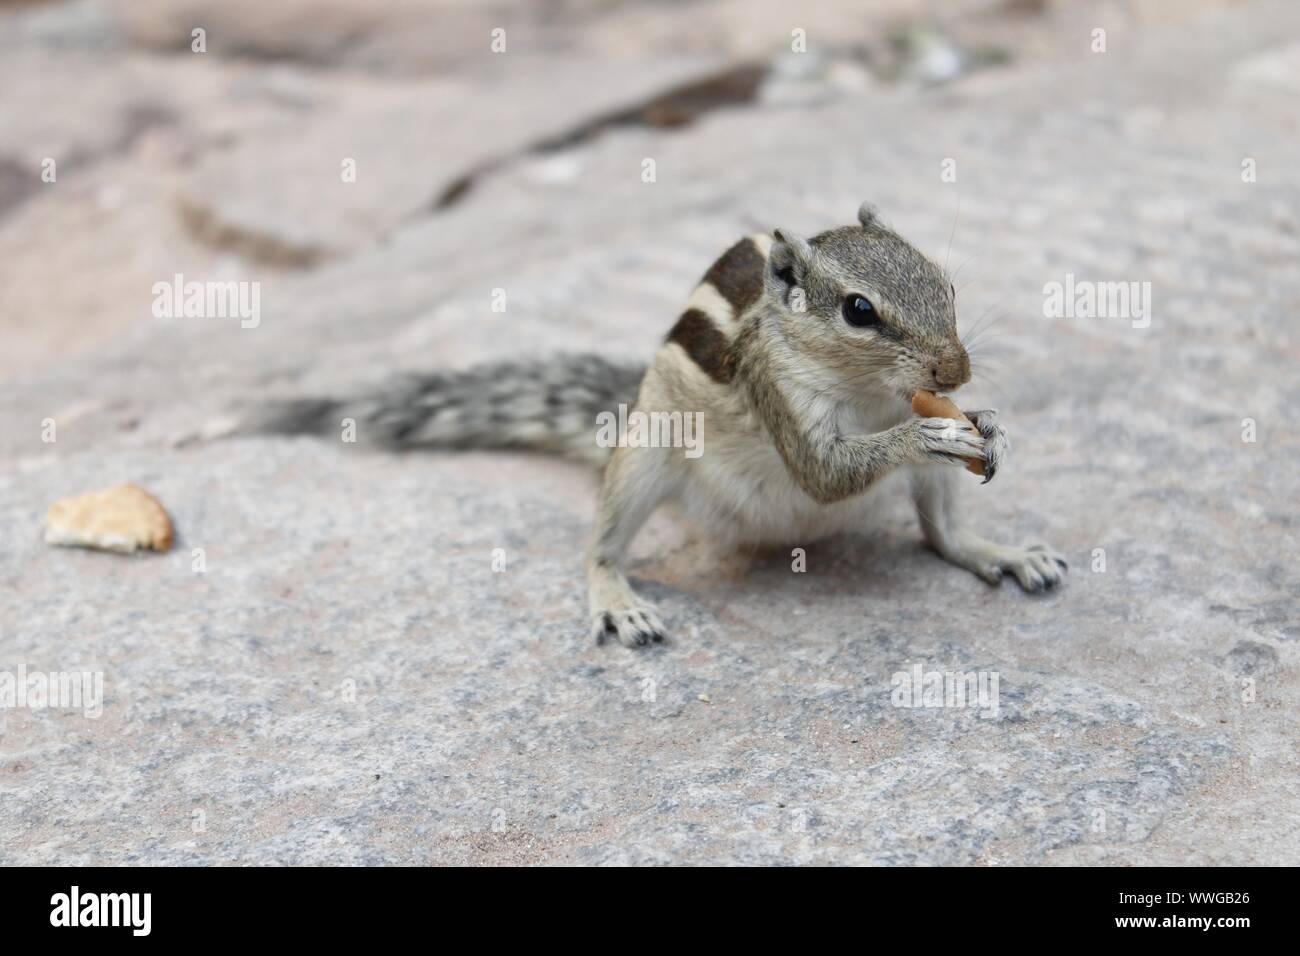 Three-striped Indian palm squirrel (Funambulus palmarum) in a park eating a piece of bread Stock Photo